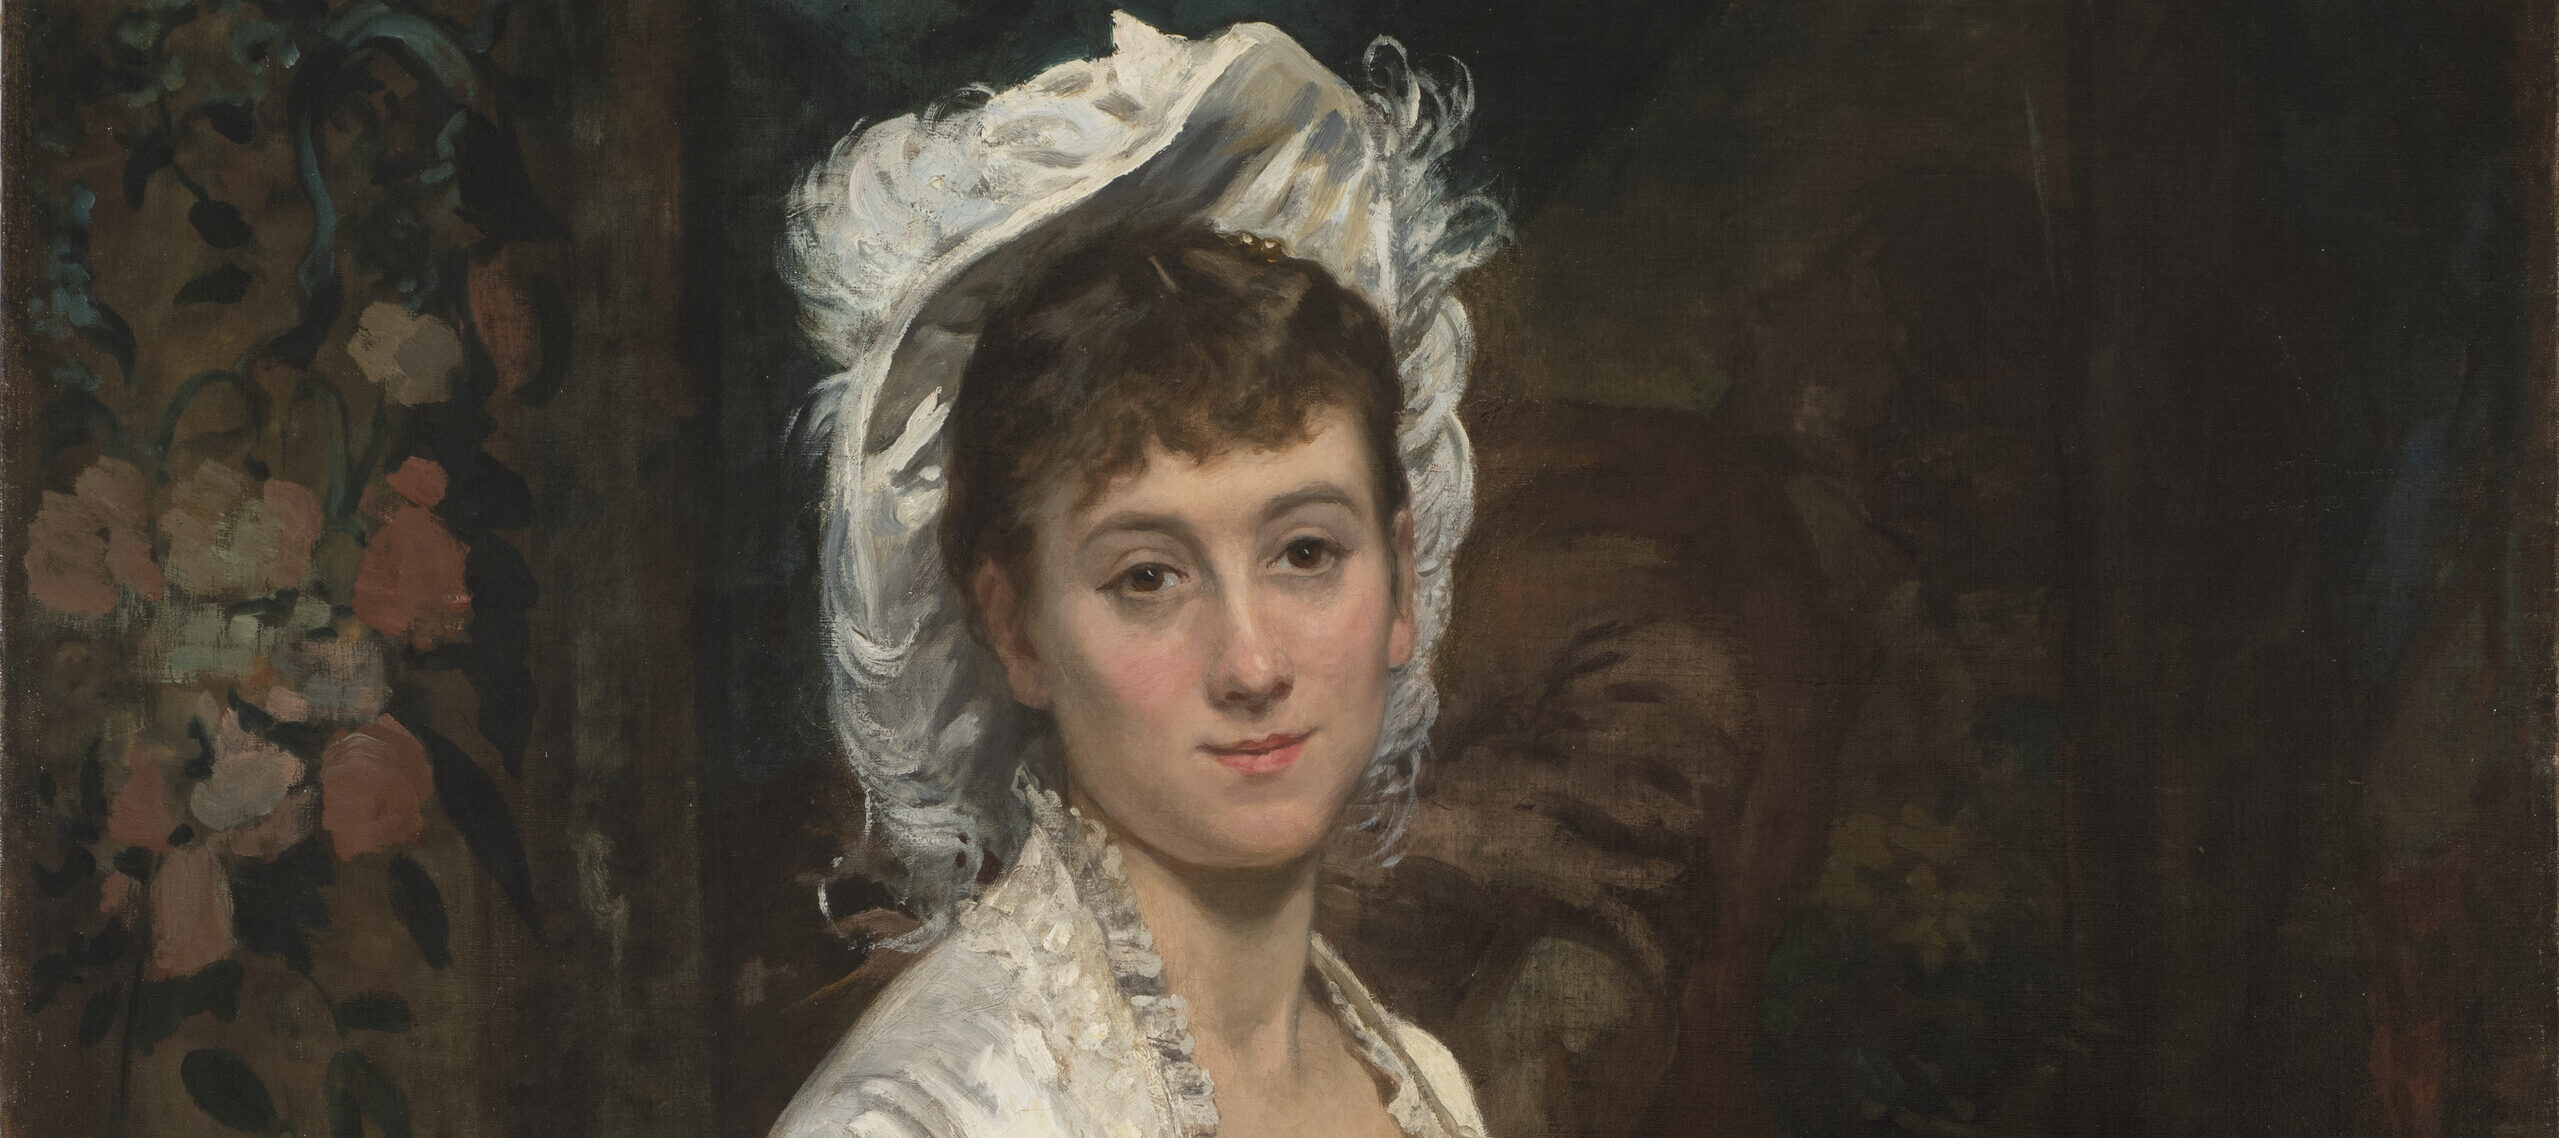 A woman with light skin tone and brown hair sits and looks at the viewer with a slight smile and calm expression, her hands resting in her lap. In a painting with loose brushstrokes, her face is more realistically detailed than her dress and darker interior surroundings. She wears an old-fashioned, ornate white silk gown with ruffles at the bodice and skirt, as well as a matching, upturned white hat with feathers and frills.